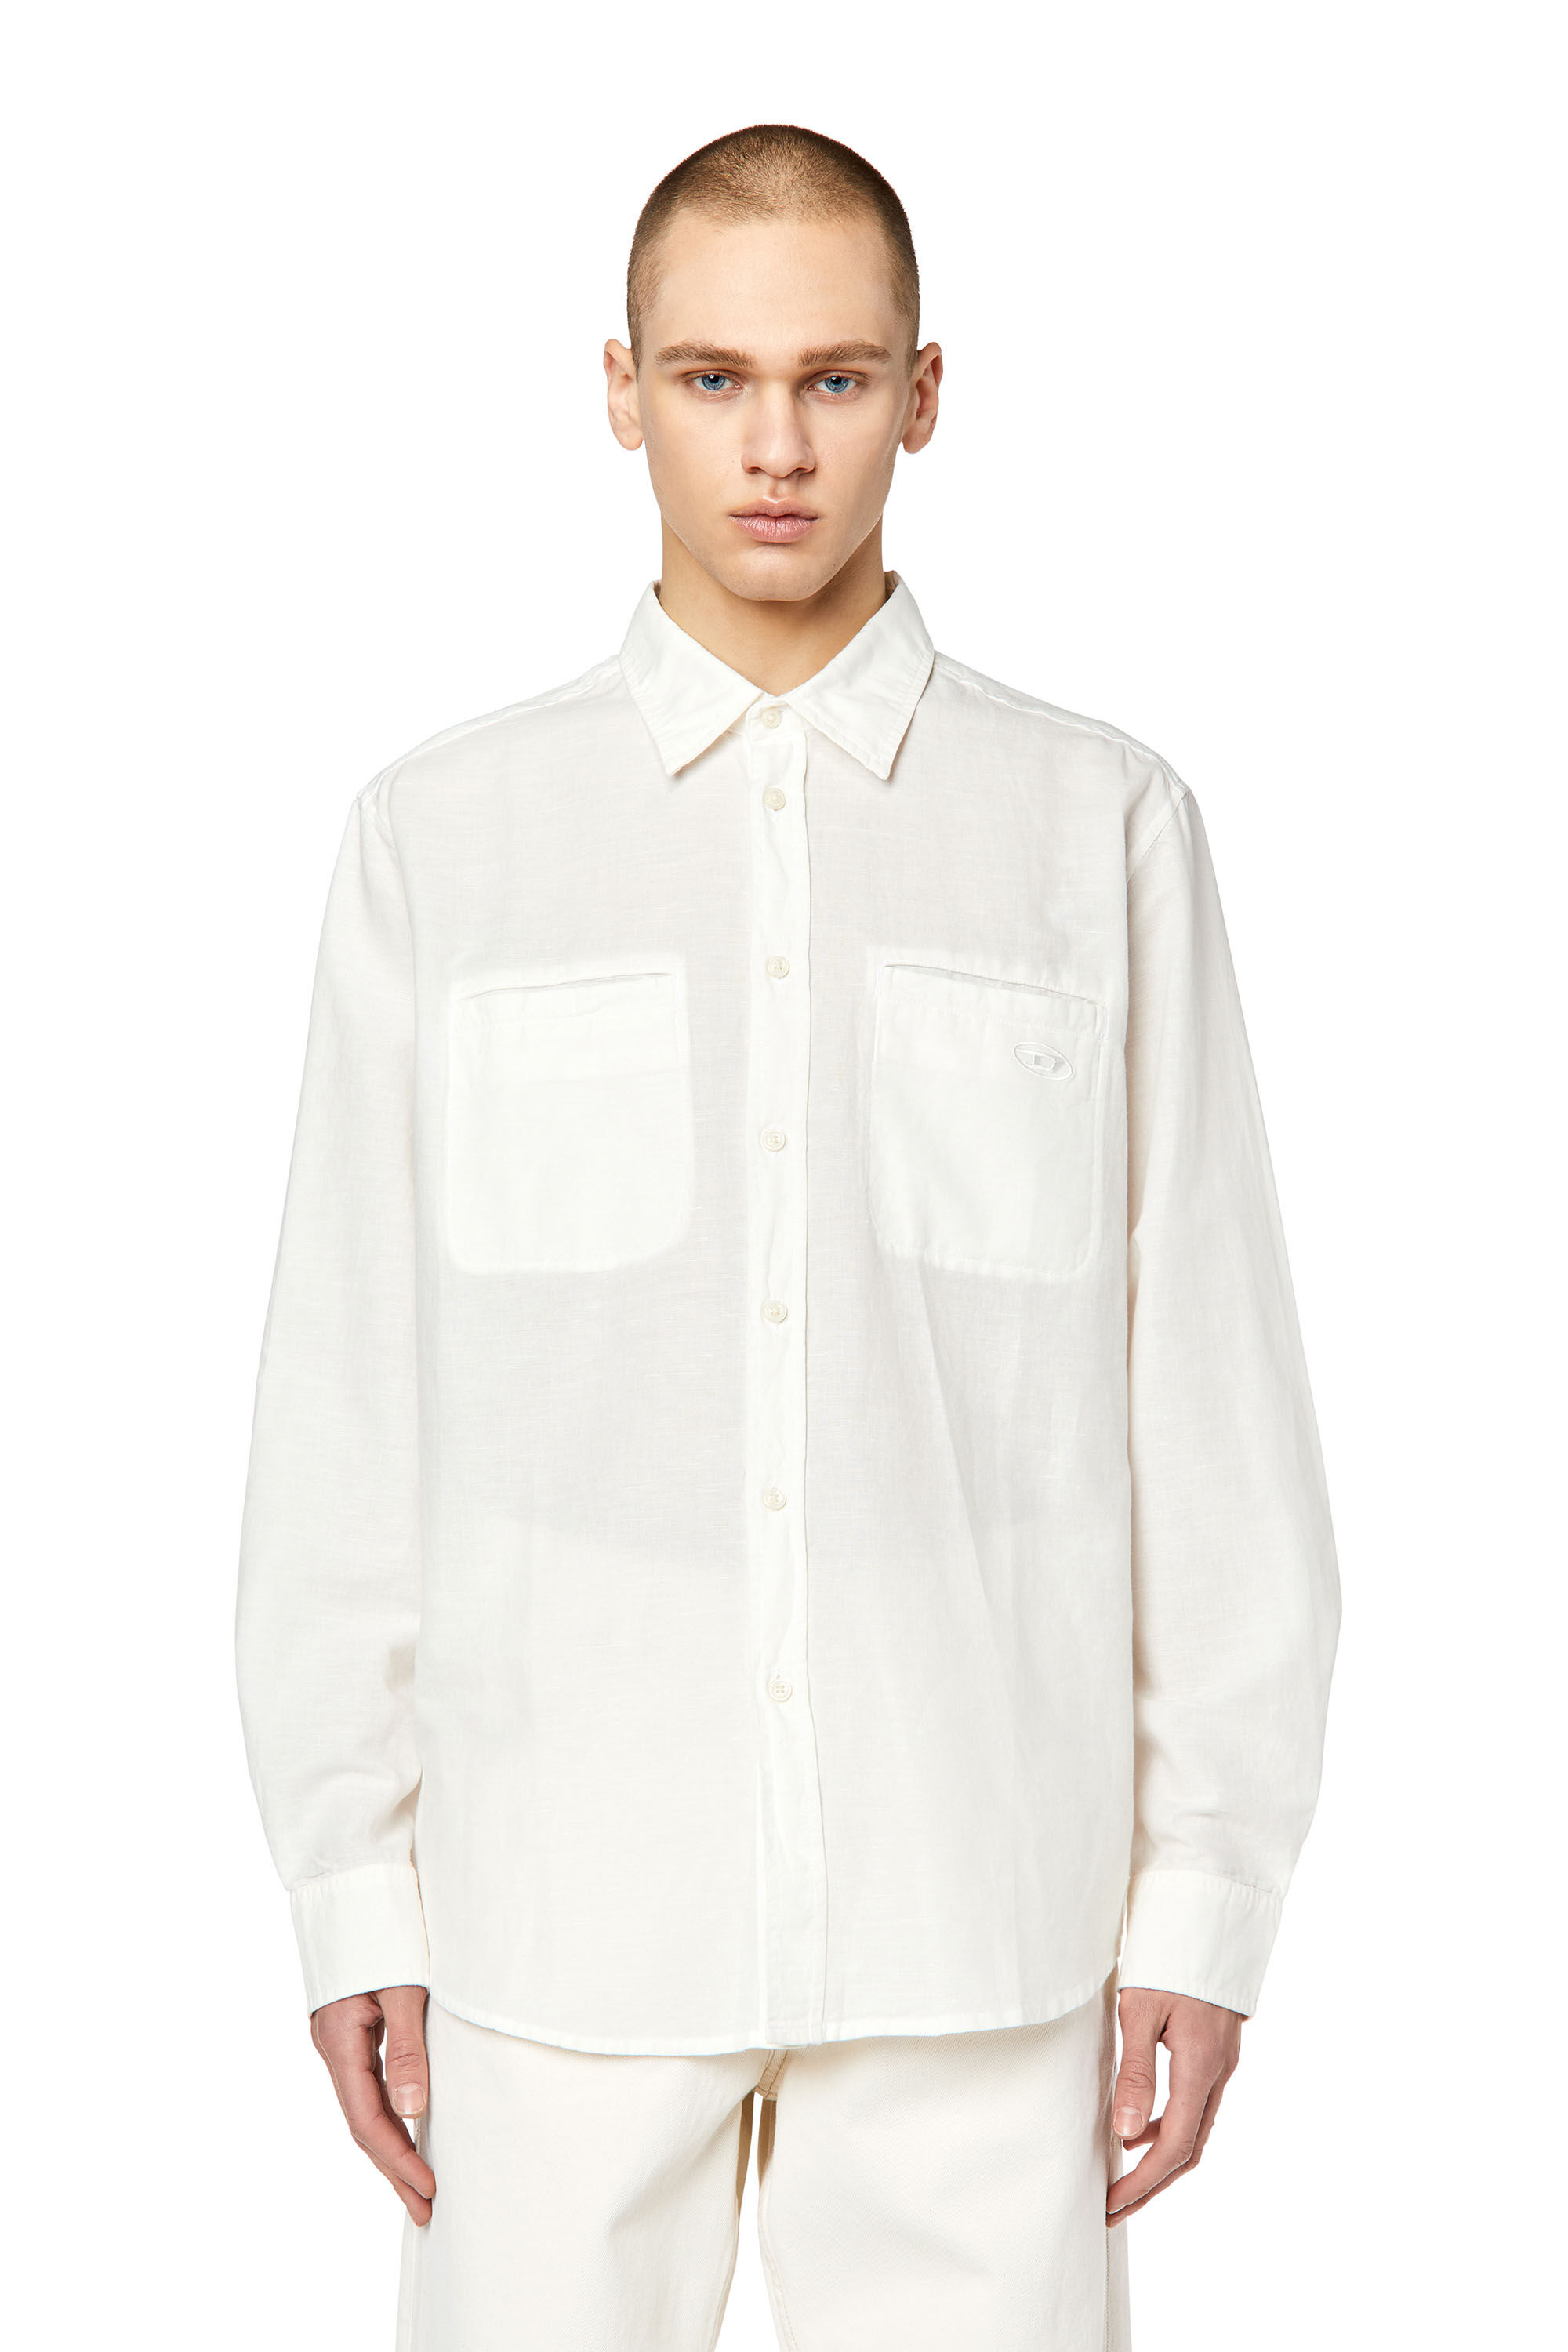 Louis Vuitton White Long Sleeve Shirt Luxembourg, SAVE 46